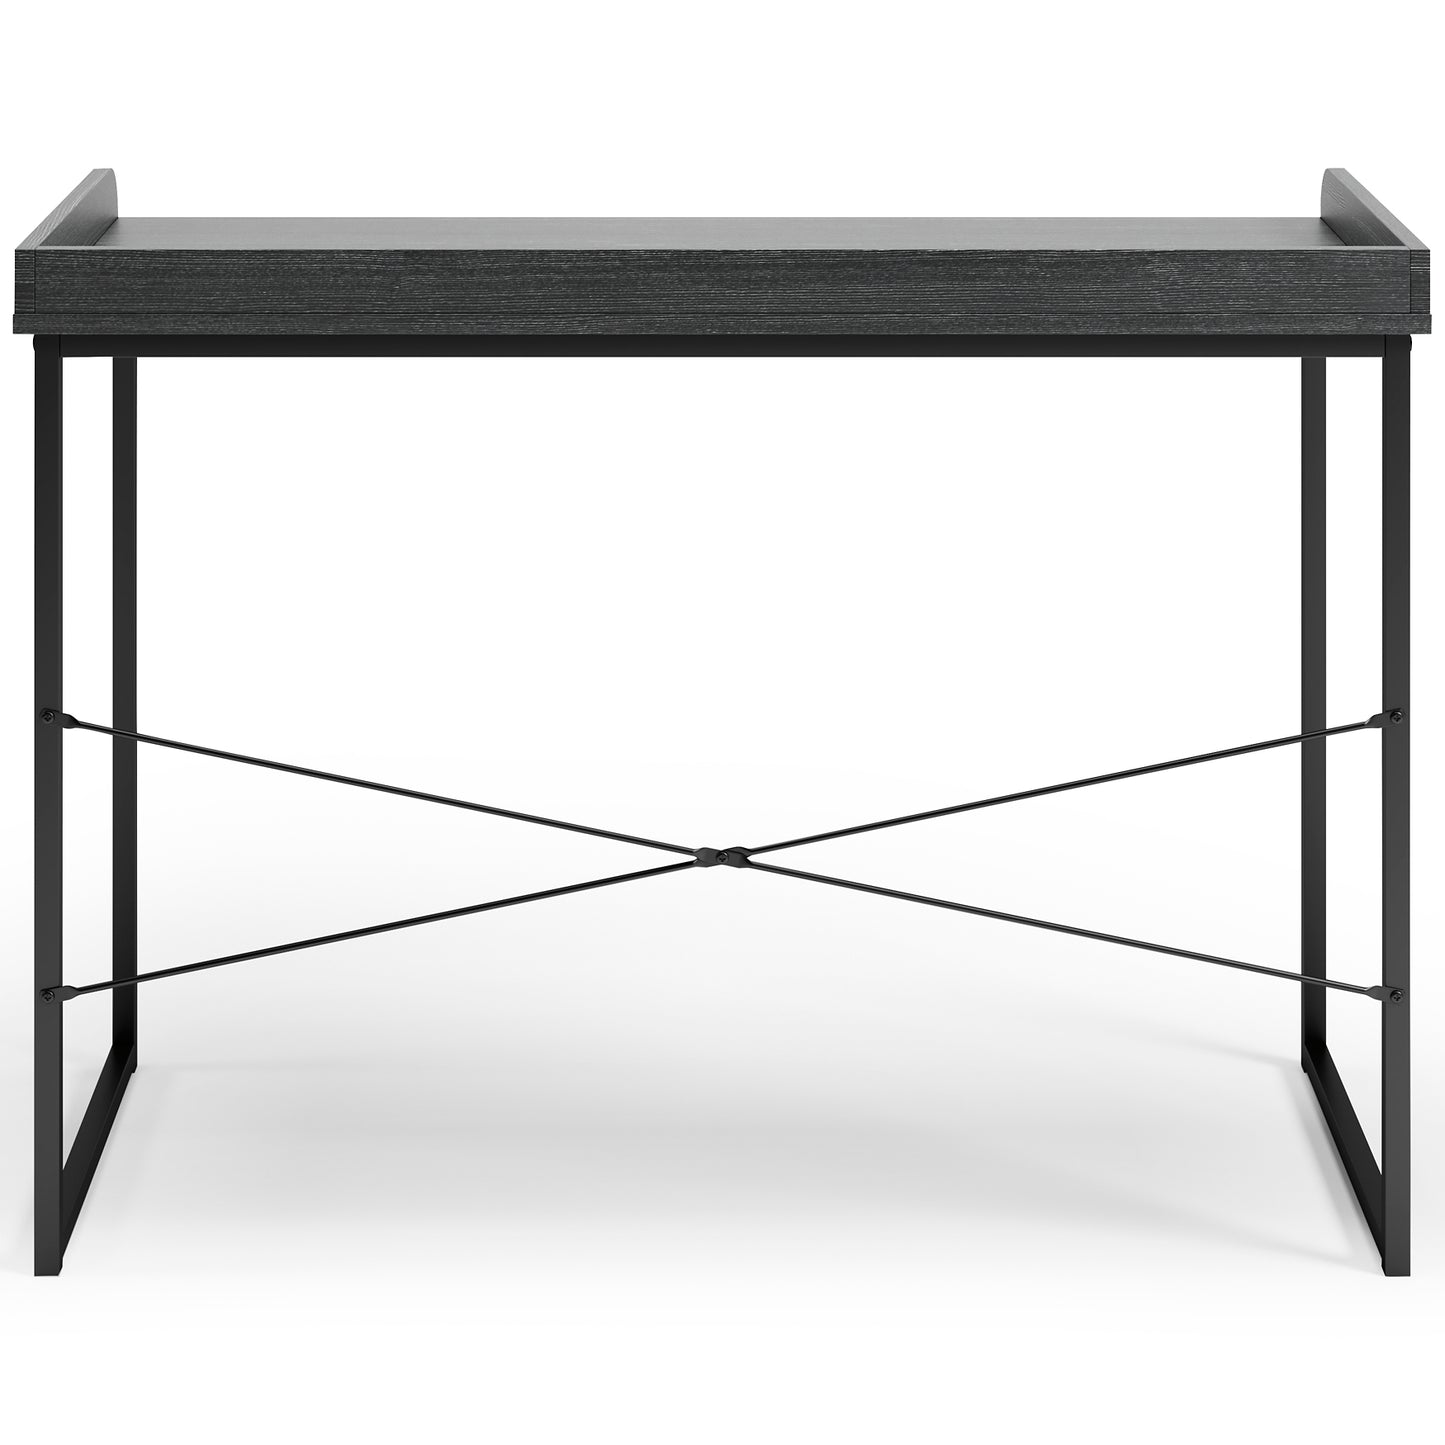 Yarlow Home Office Desk Signature Design by Ashley®